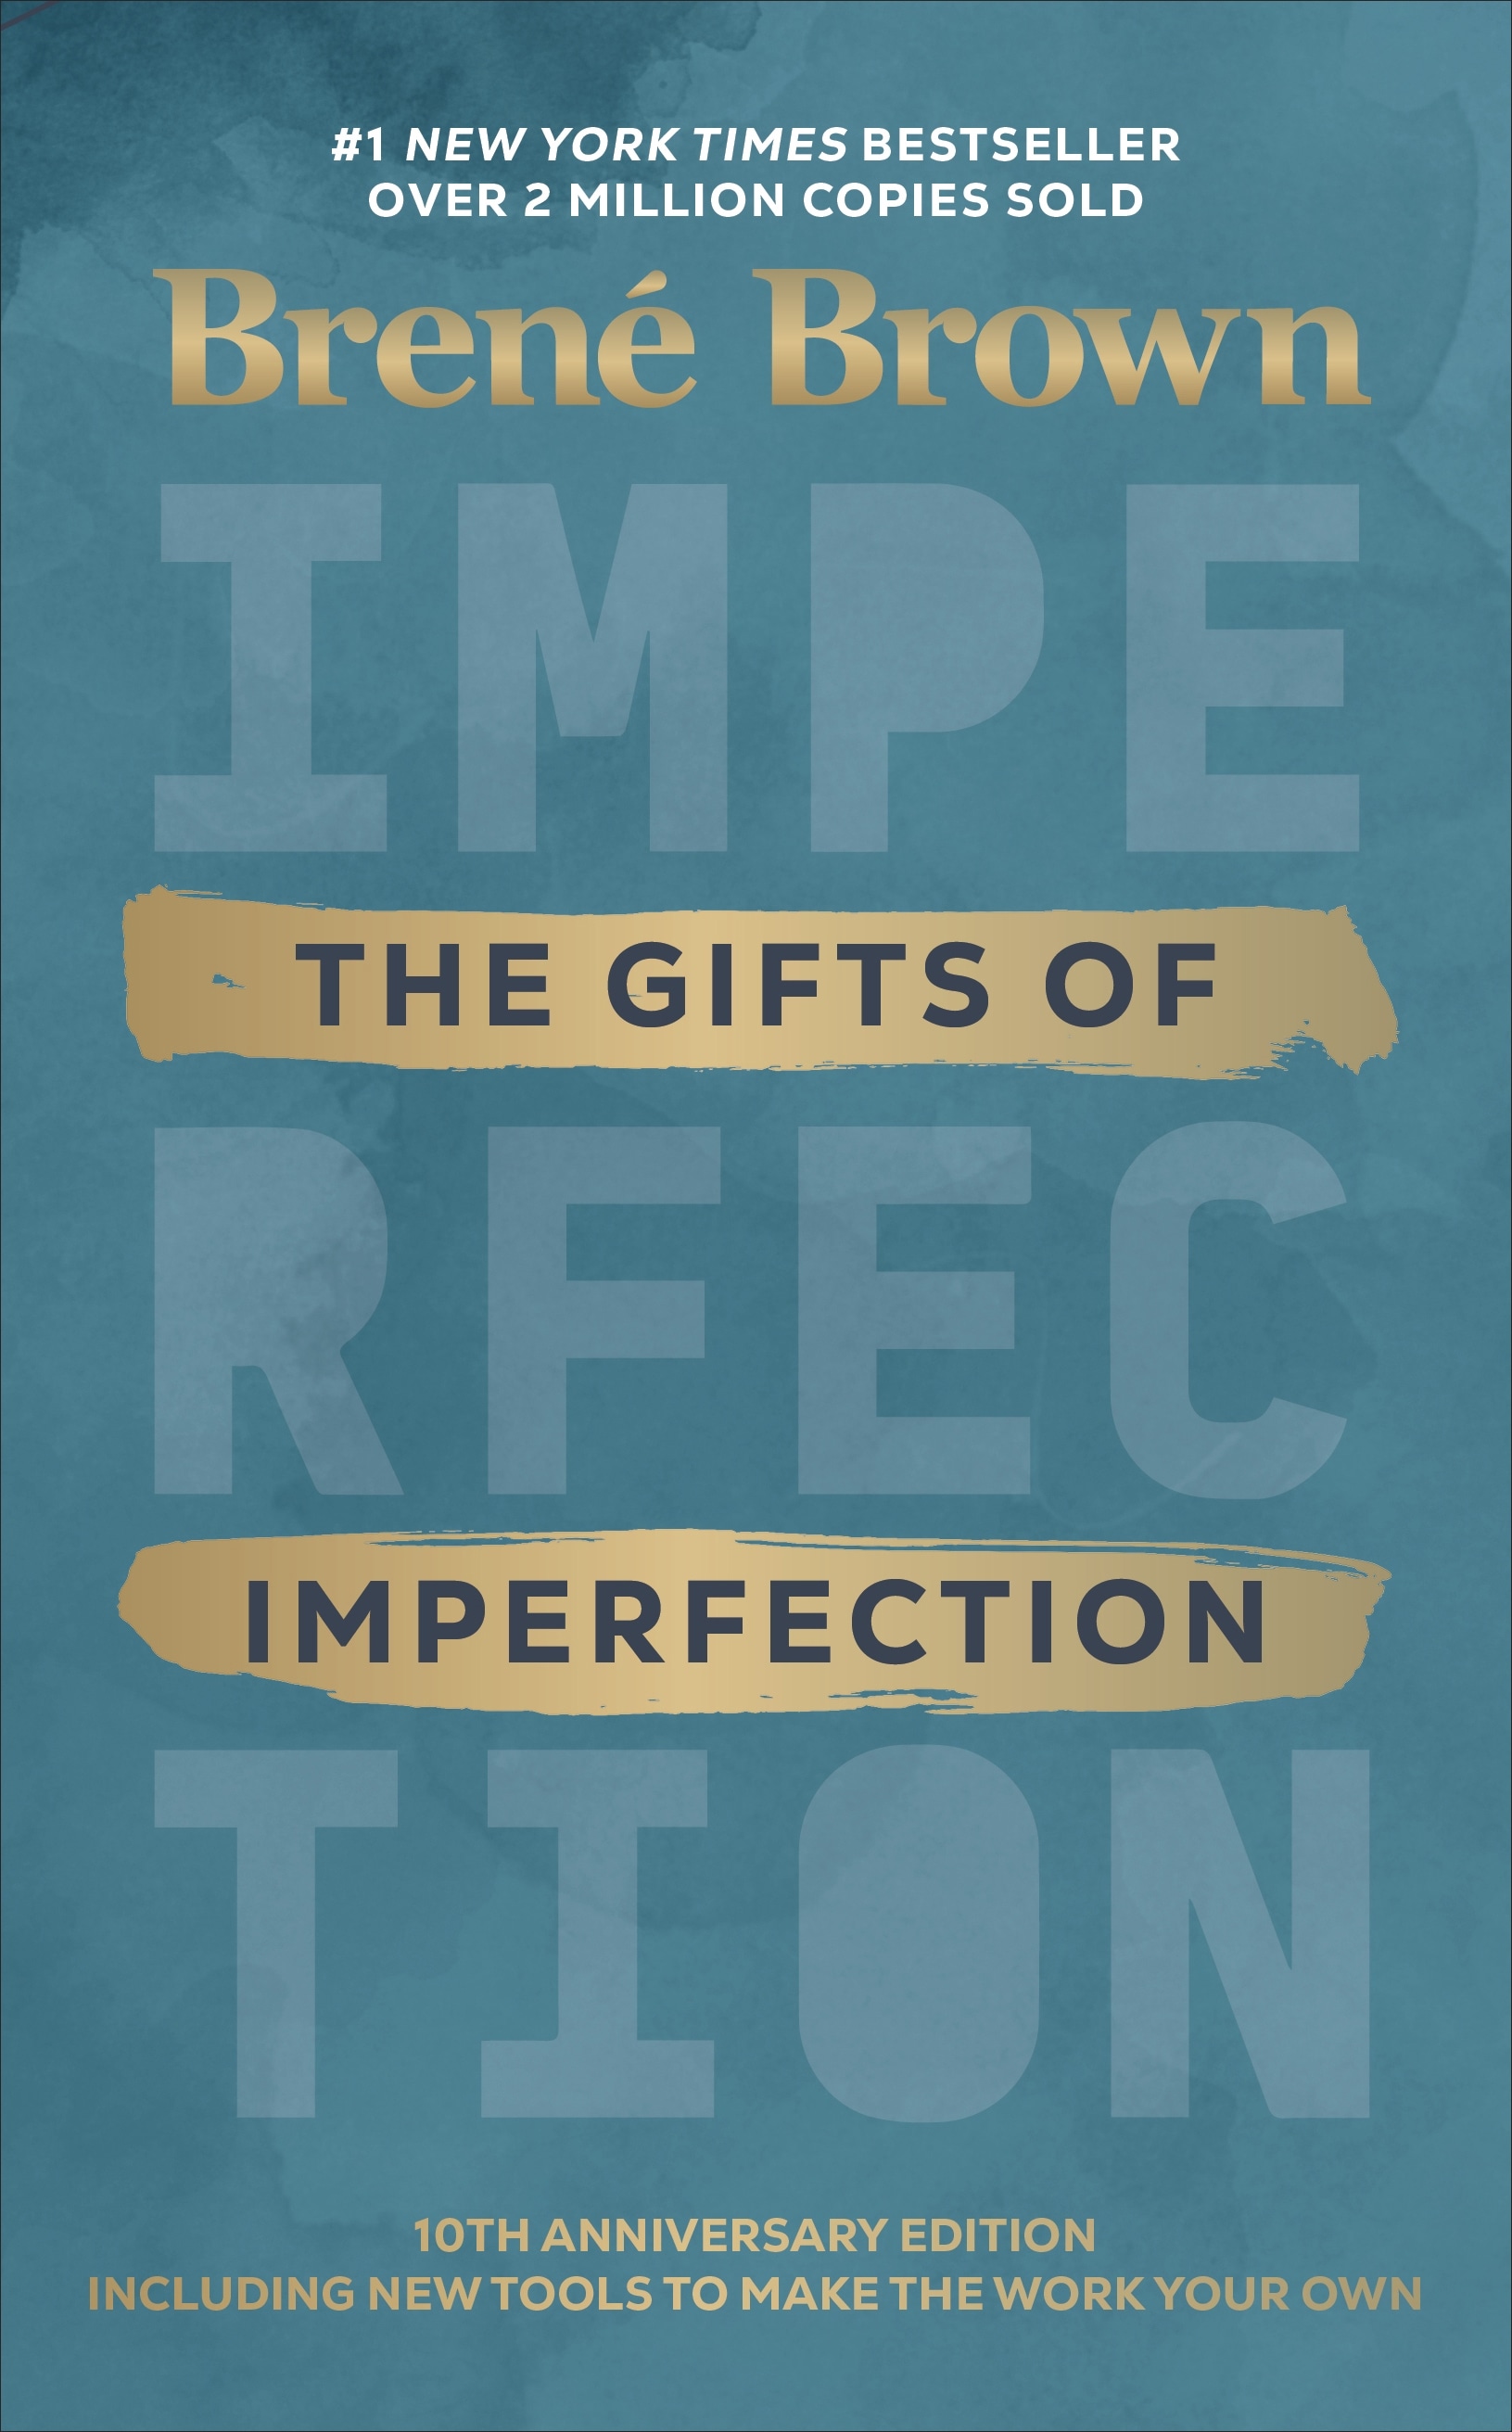 Book “The Gifts of Imperfection” by Brené Brown — September 8, 2020